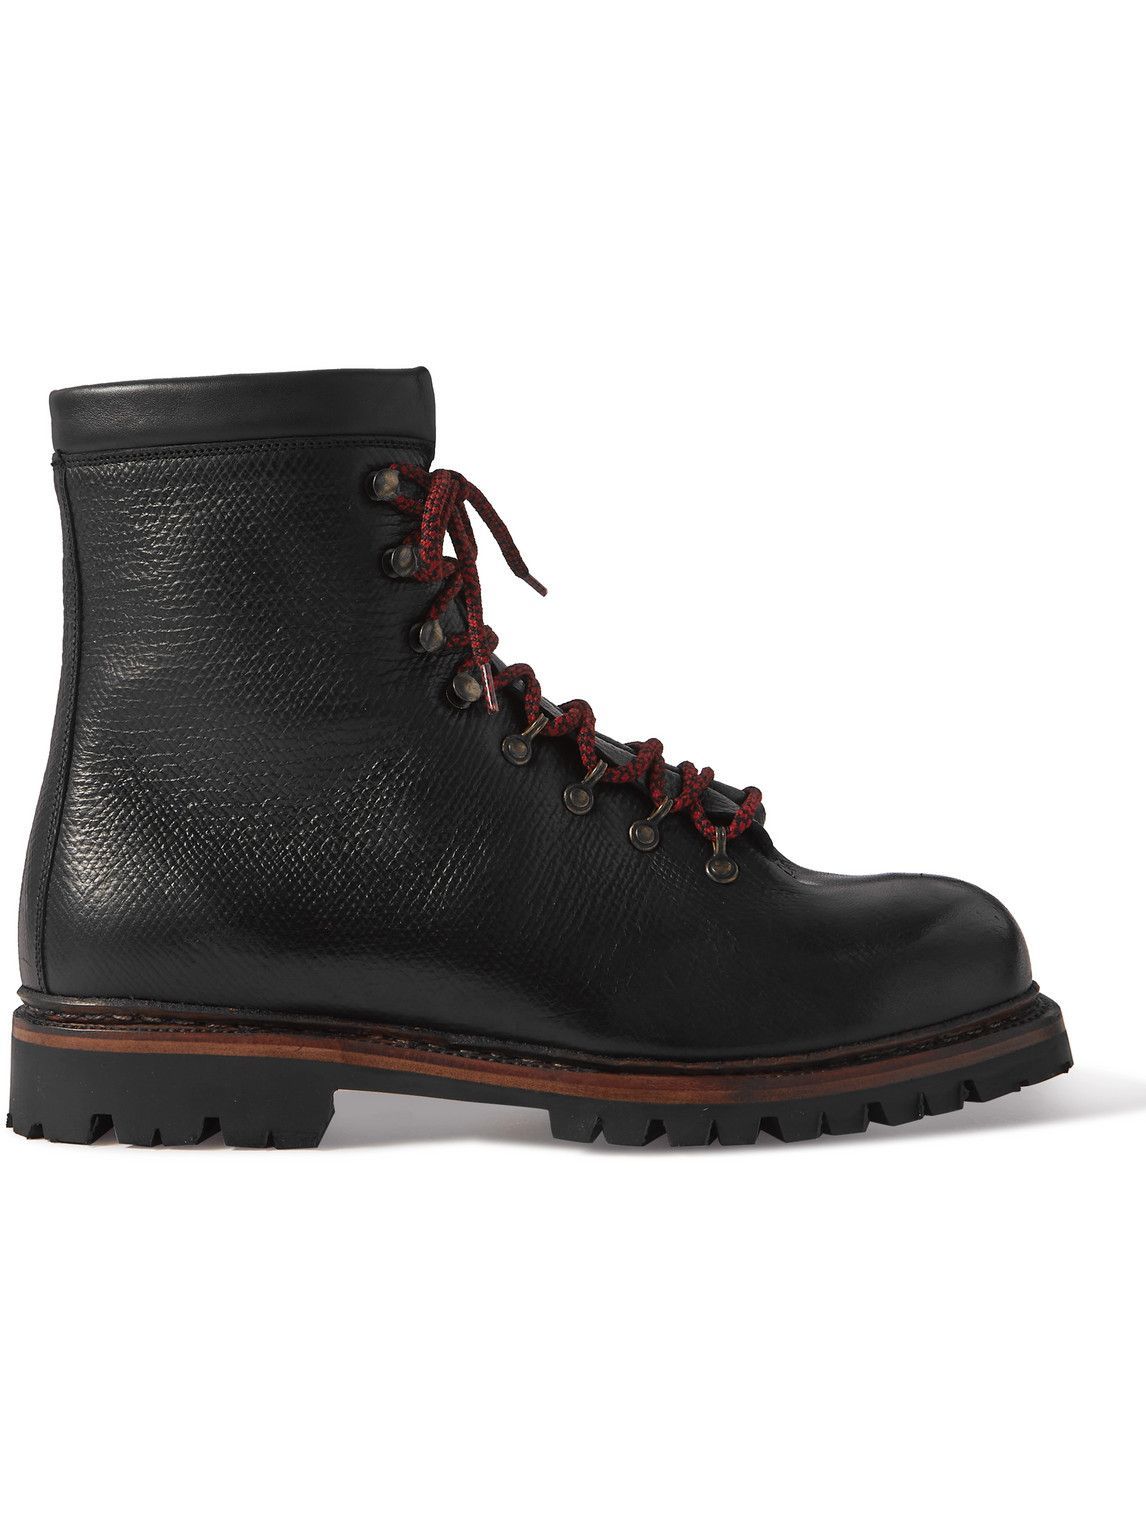 George Cleverley - Full-Grain Leather Boots - Black George Cleverley